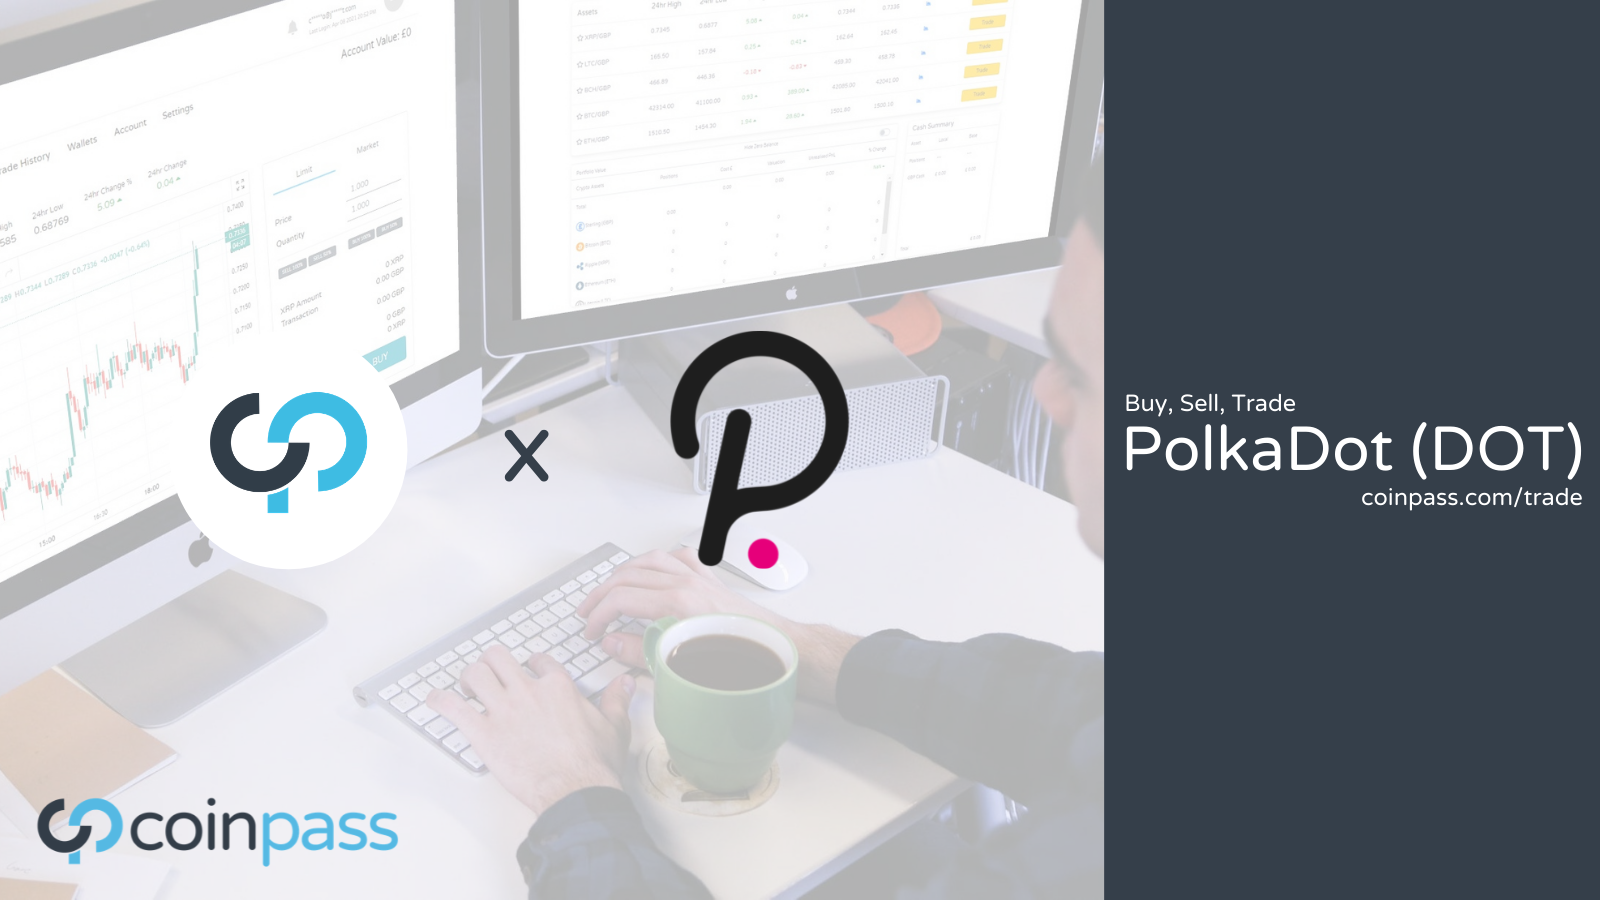 coinpass adds polkadot to its trading platforms